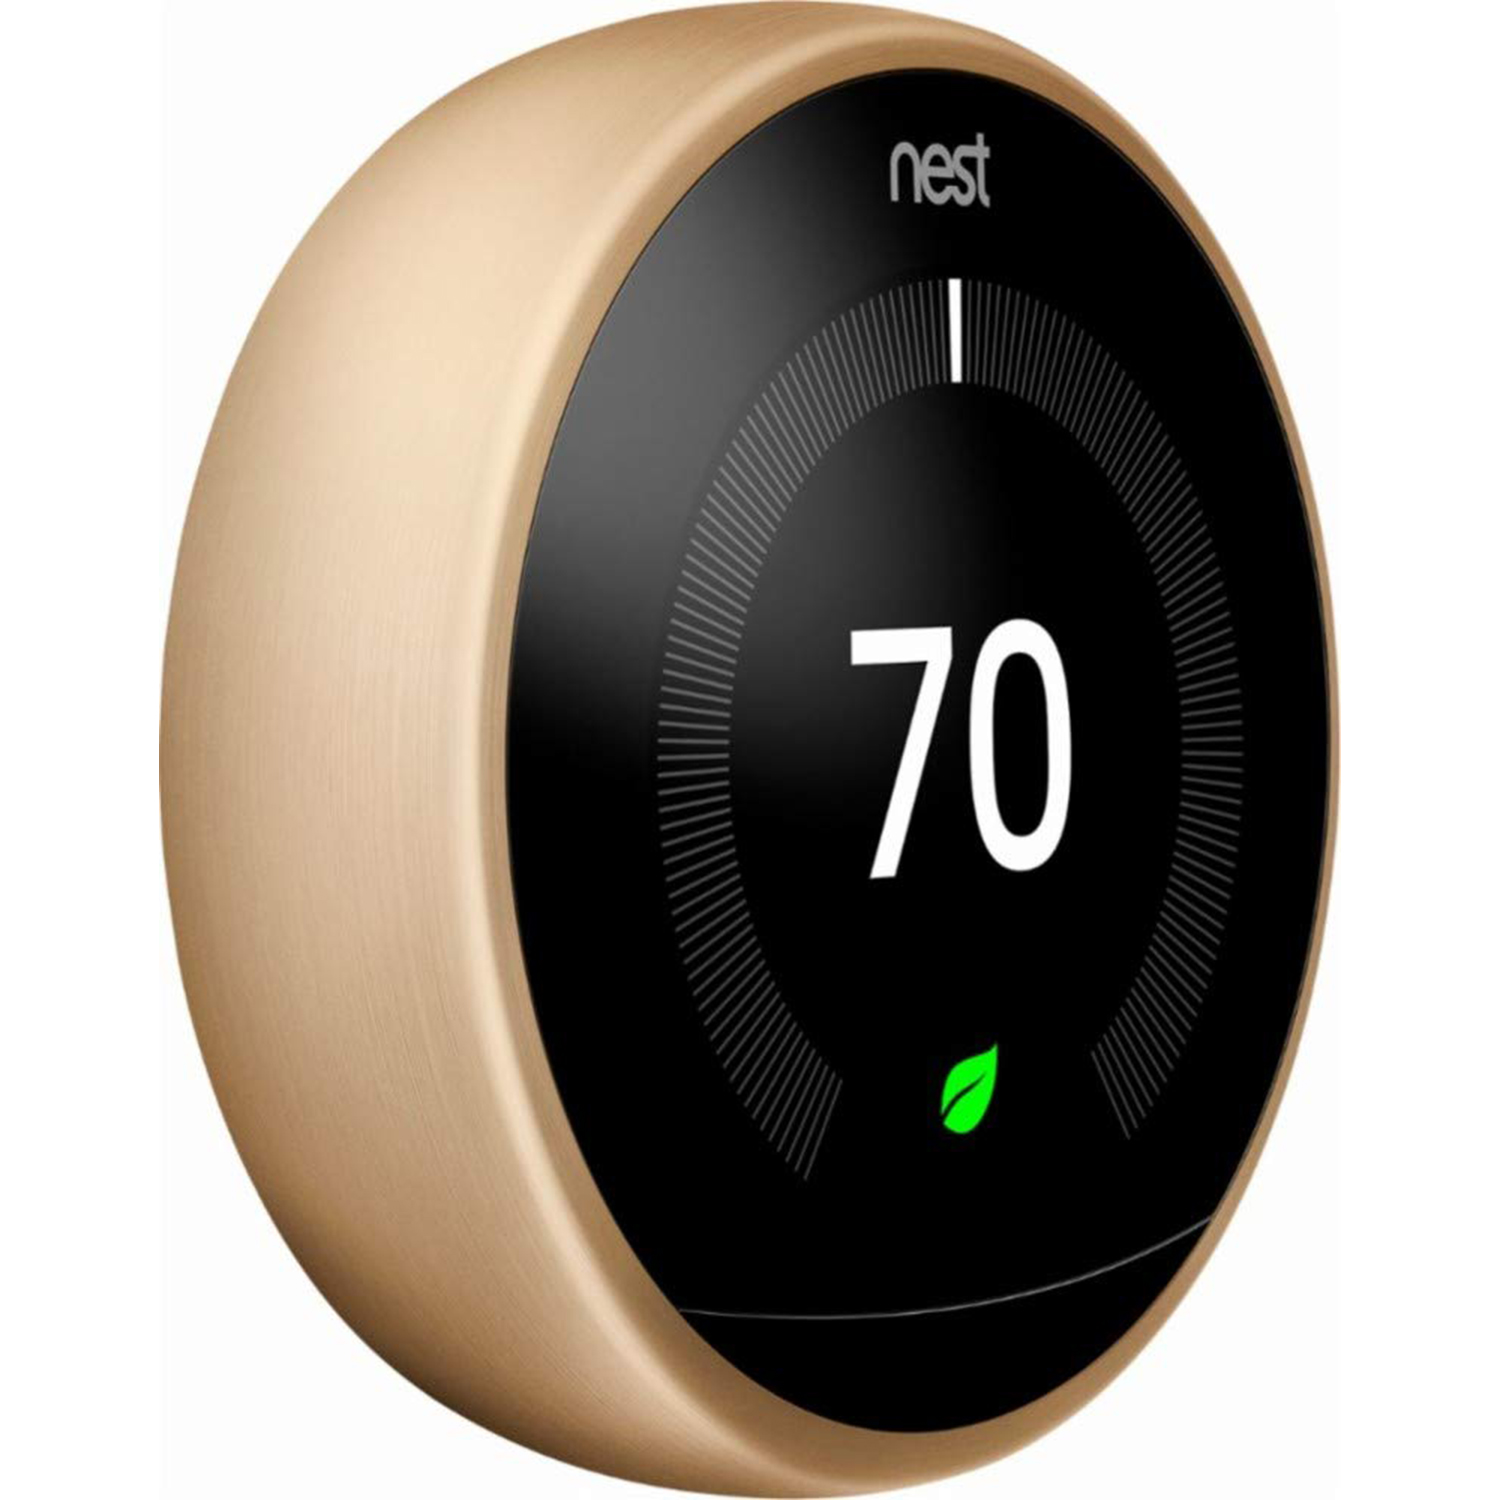 Nest T3032US Nest Smart Learning Programmable Thermostat - 3rd Generation, Brass - image 3 of 5